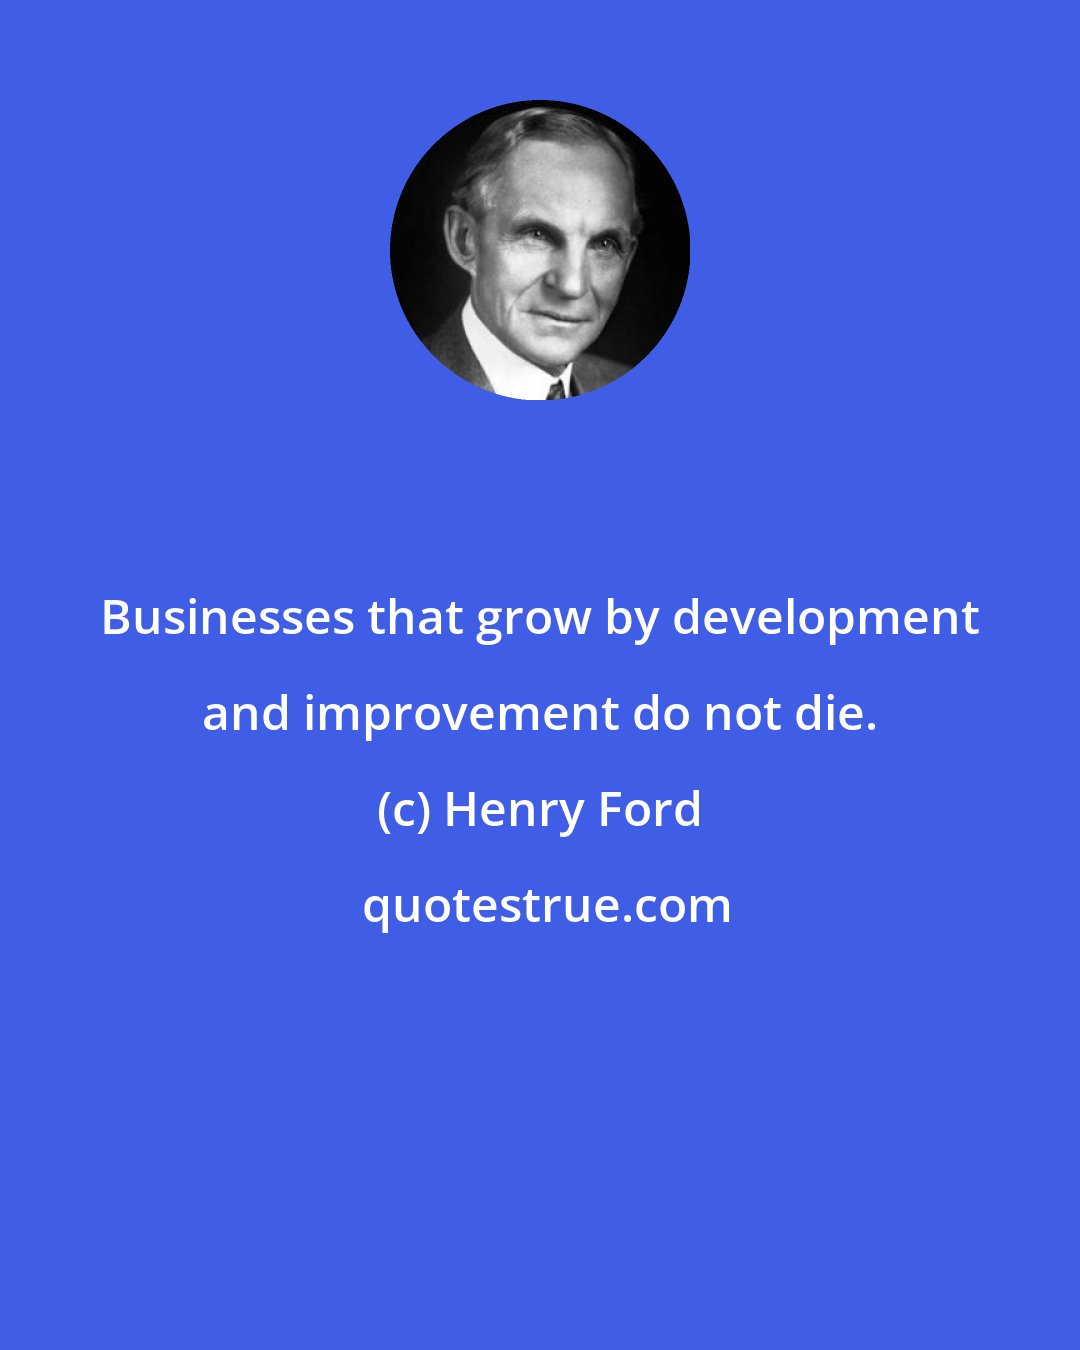 Henry Ford: Businesses that grow by development and improvement do not die.